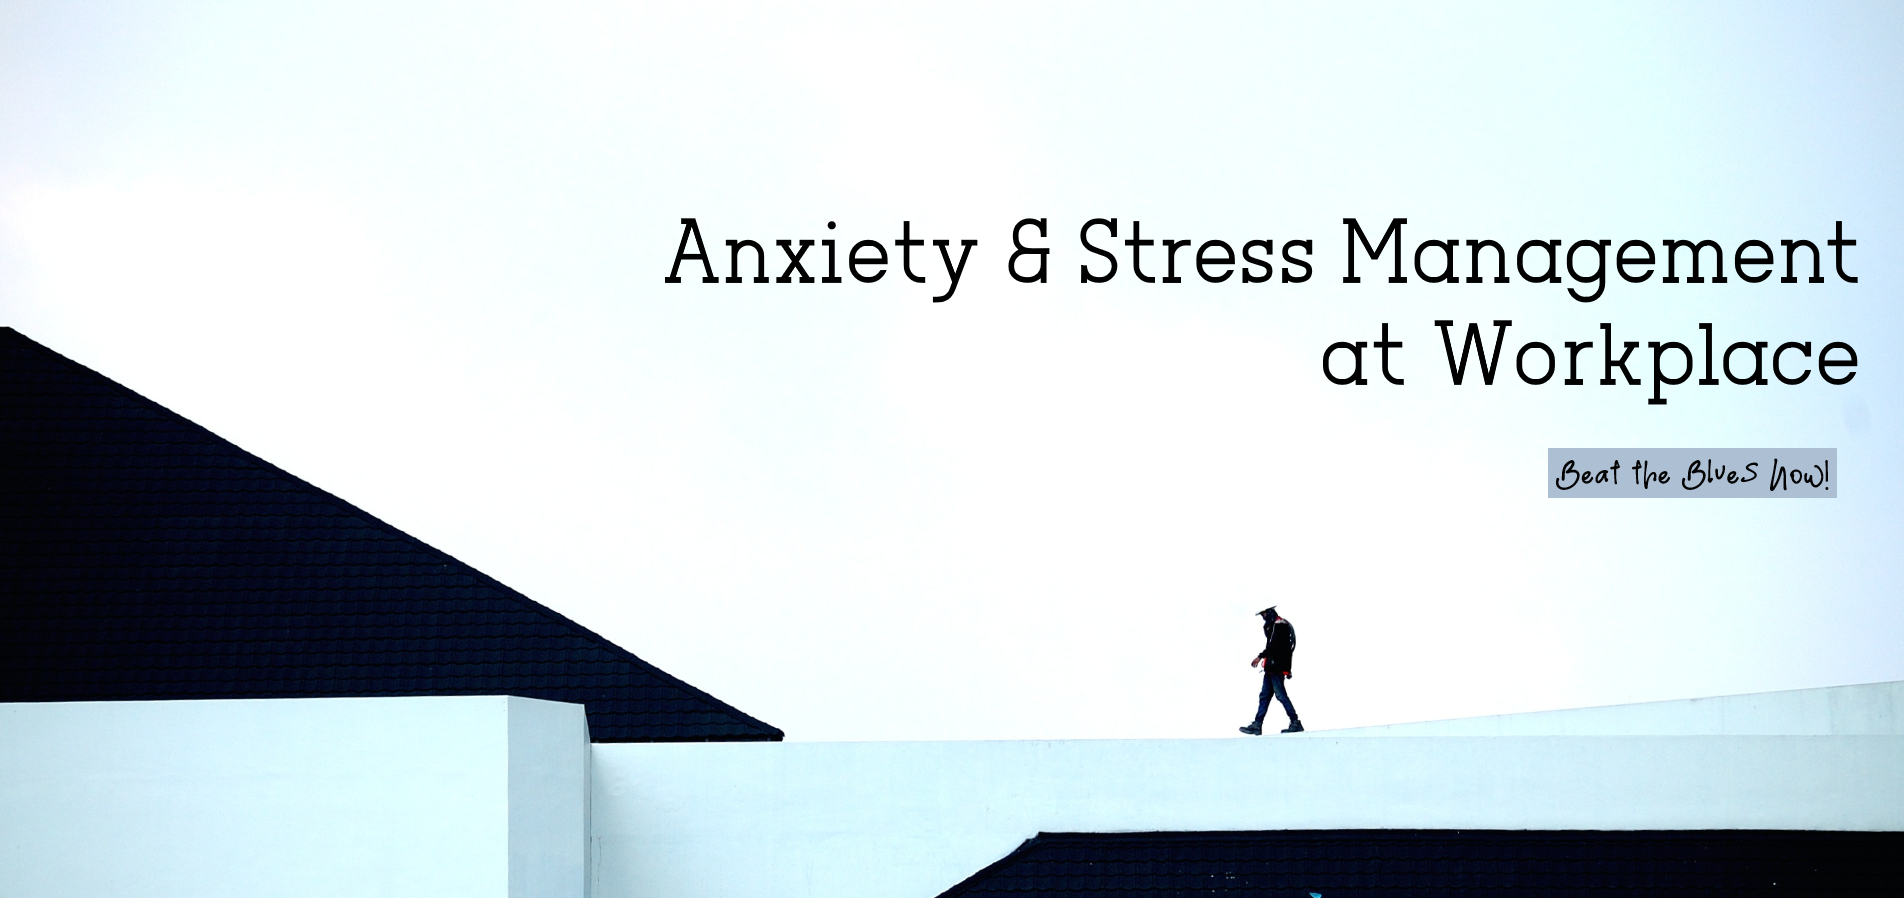 Anxiety Stress Management at workplace _ jobmotivated job motivation